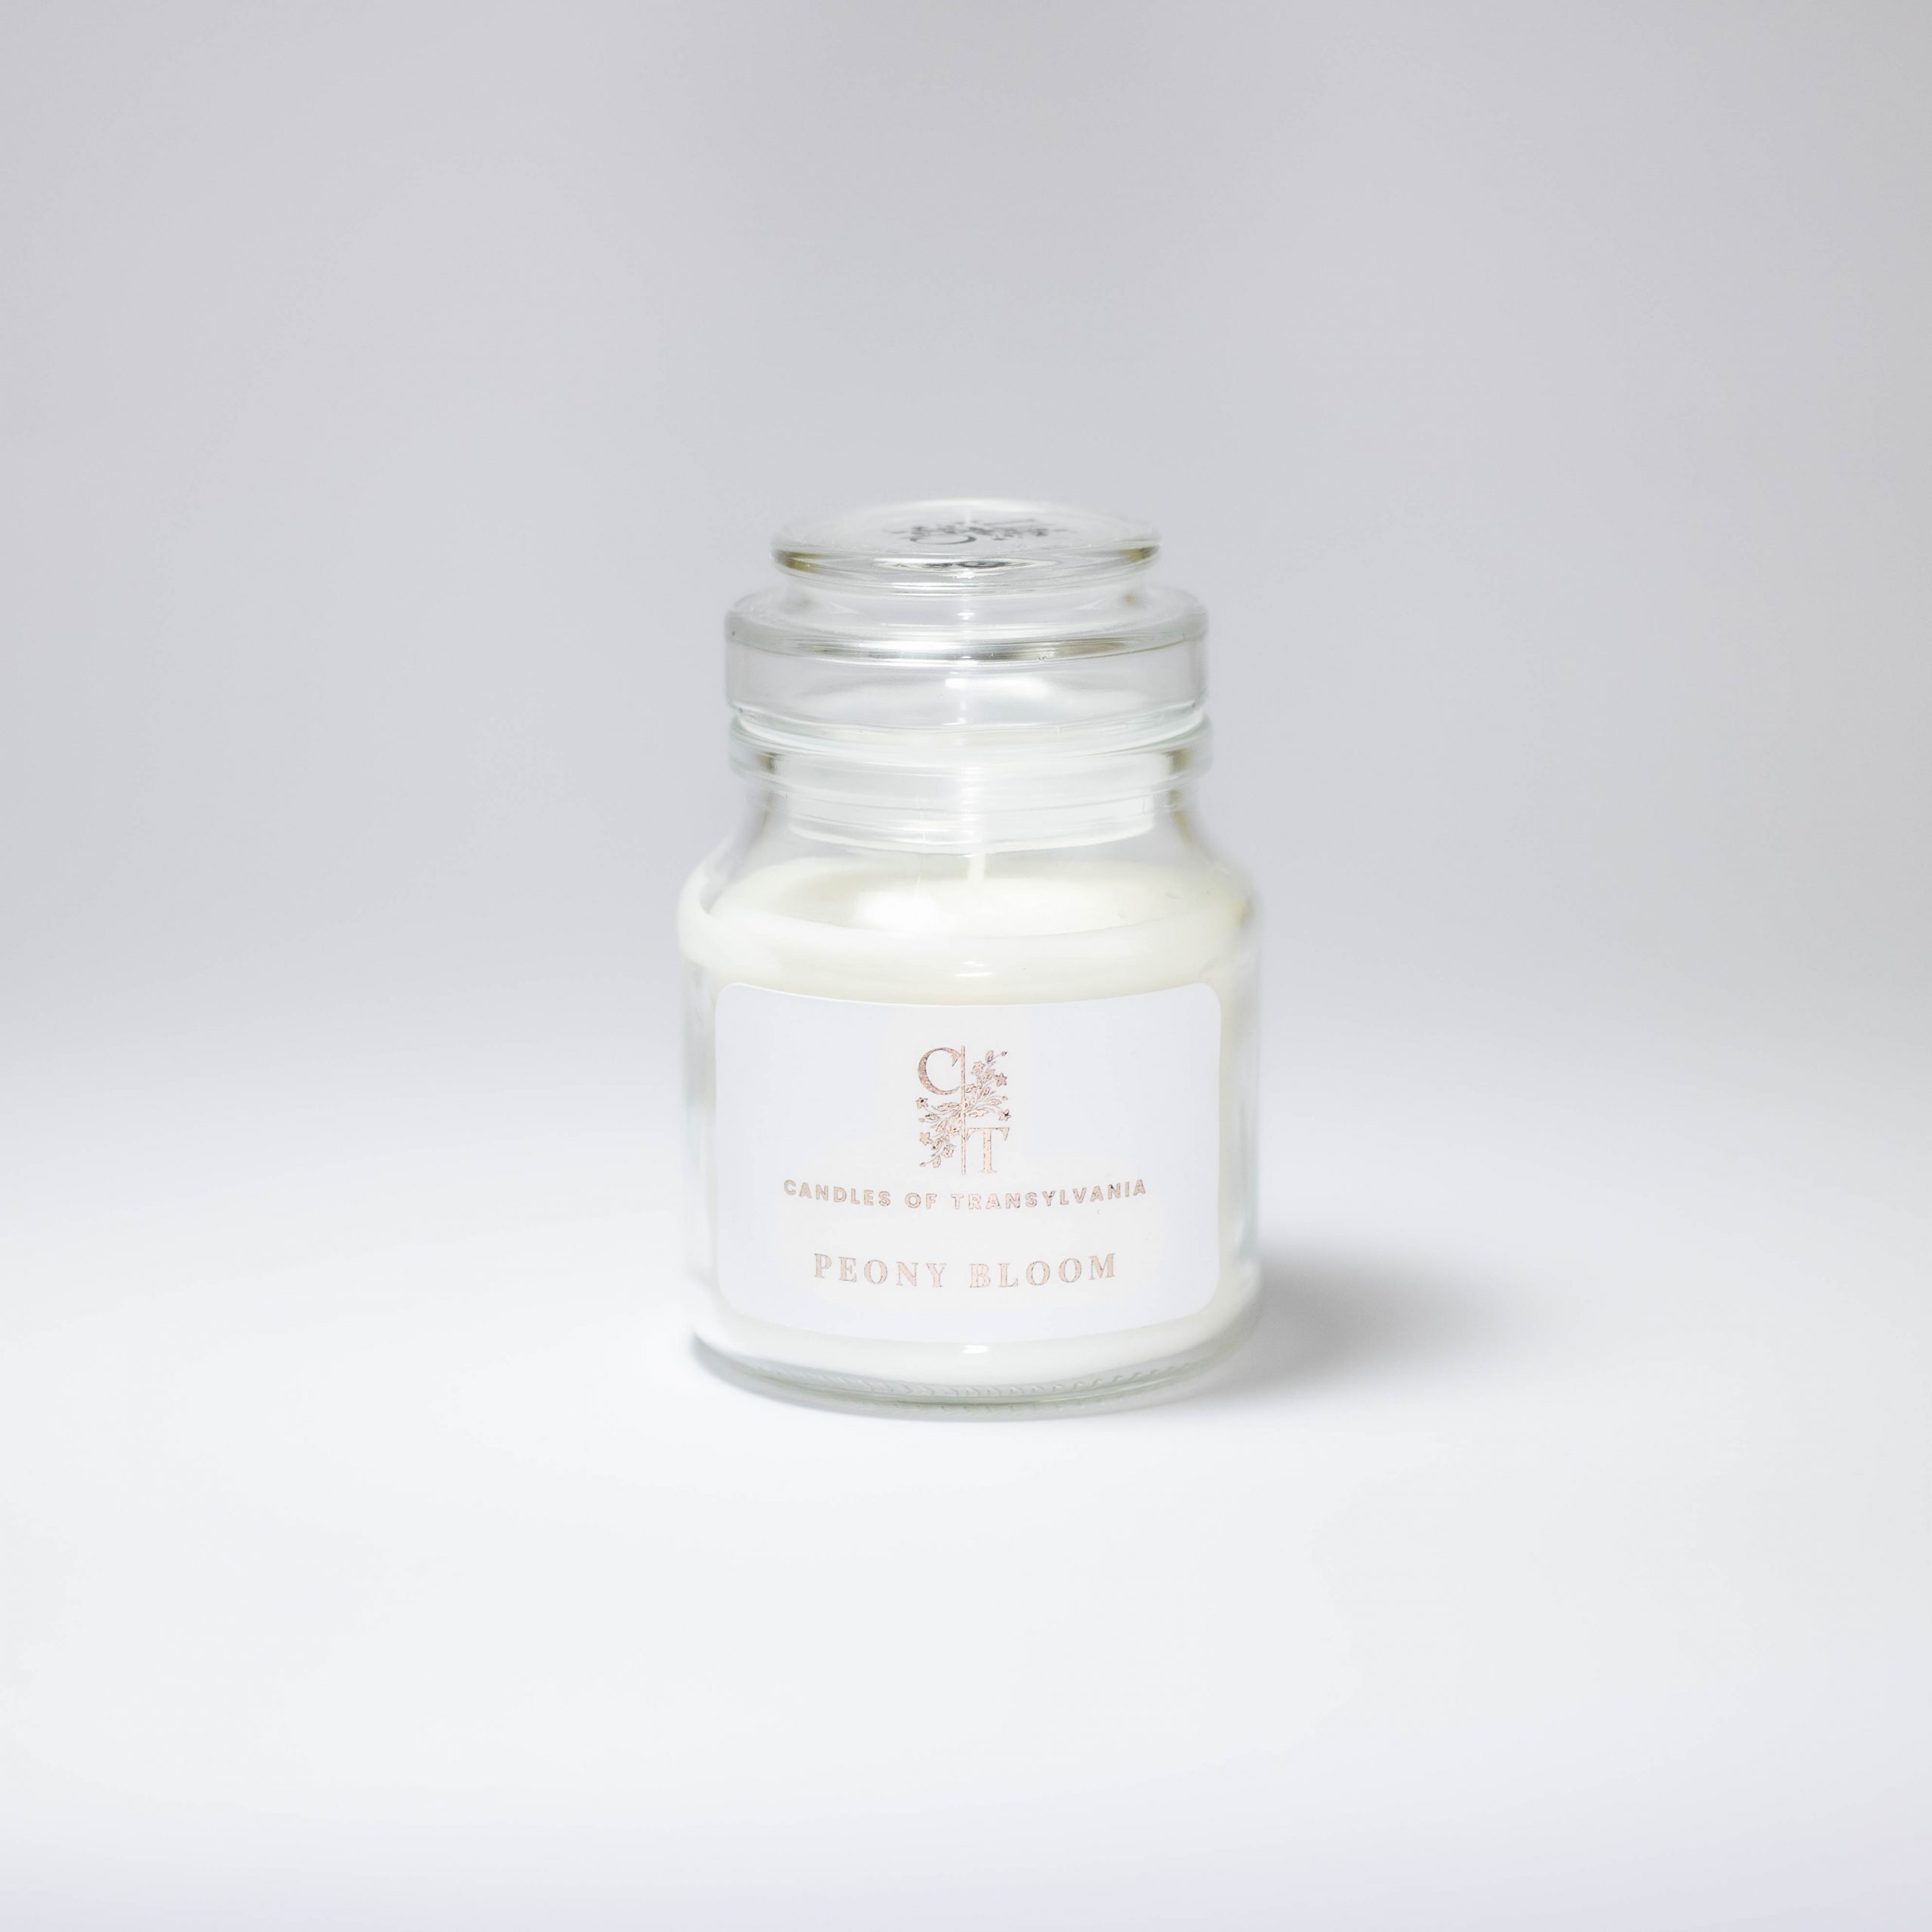 PEONY BLOOM SCENTED CANDLE-8013ef75